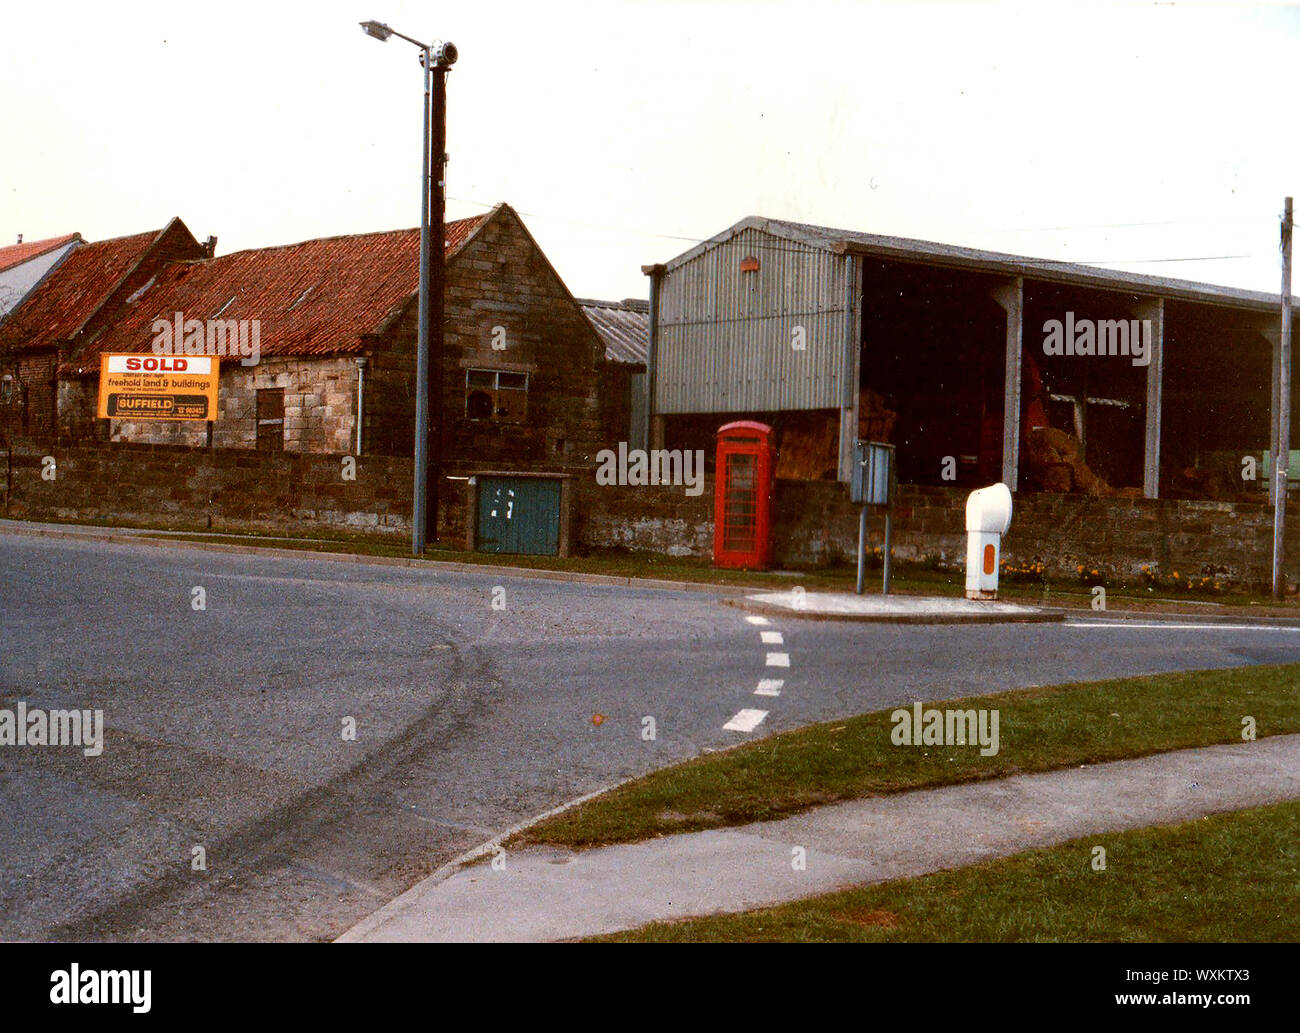 June 1986. Former farm buildings at Four  Lane Ends roundabout (Road to Switchbacks on the right), Whitby , Yorkshire, England, prior to redevelopment. The area on the outskirts of the town now contains residential properties. On the lamp post can be seen an old AIR RAID SIREN, and below it a traditional British red public telephone box. Stock Photo